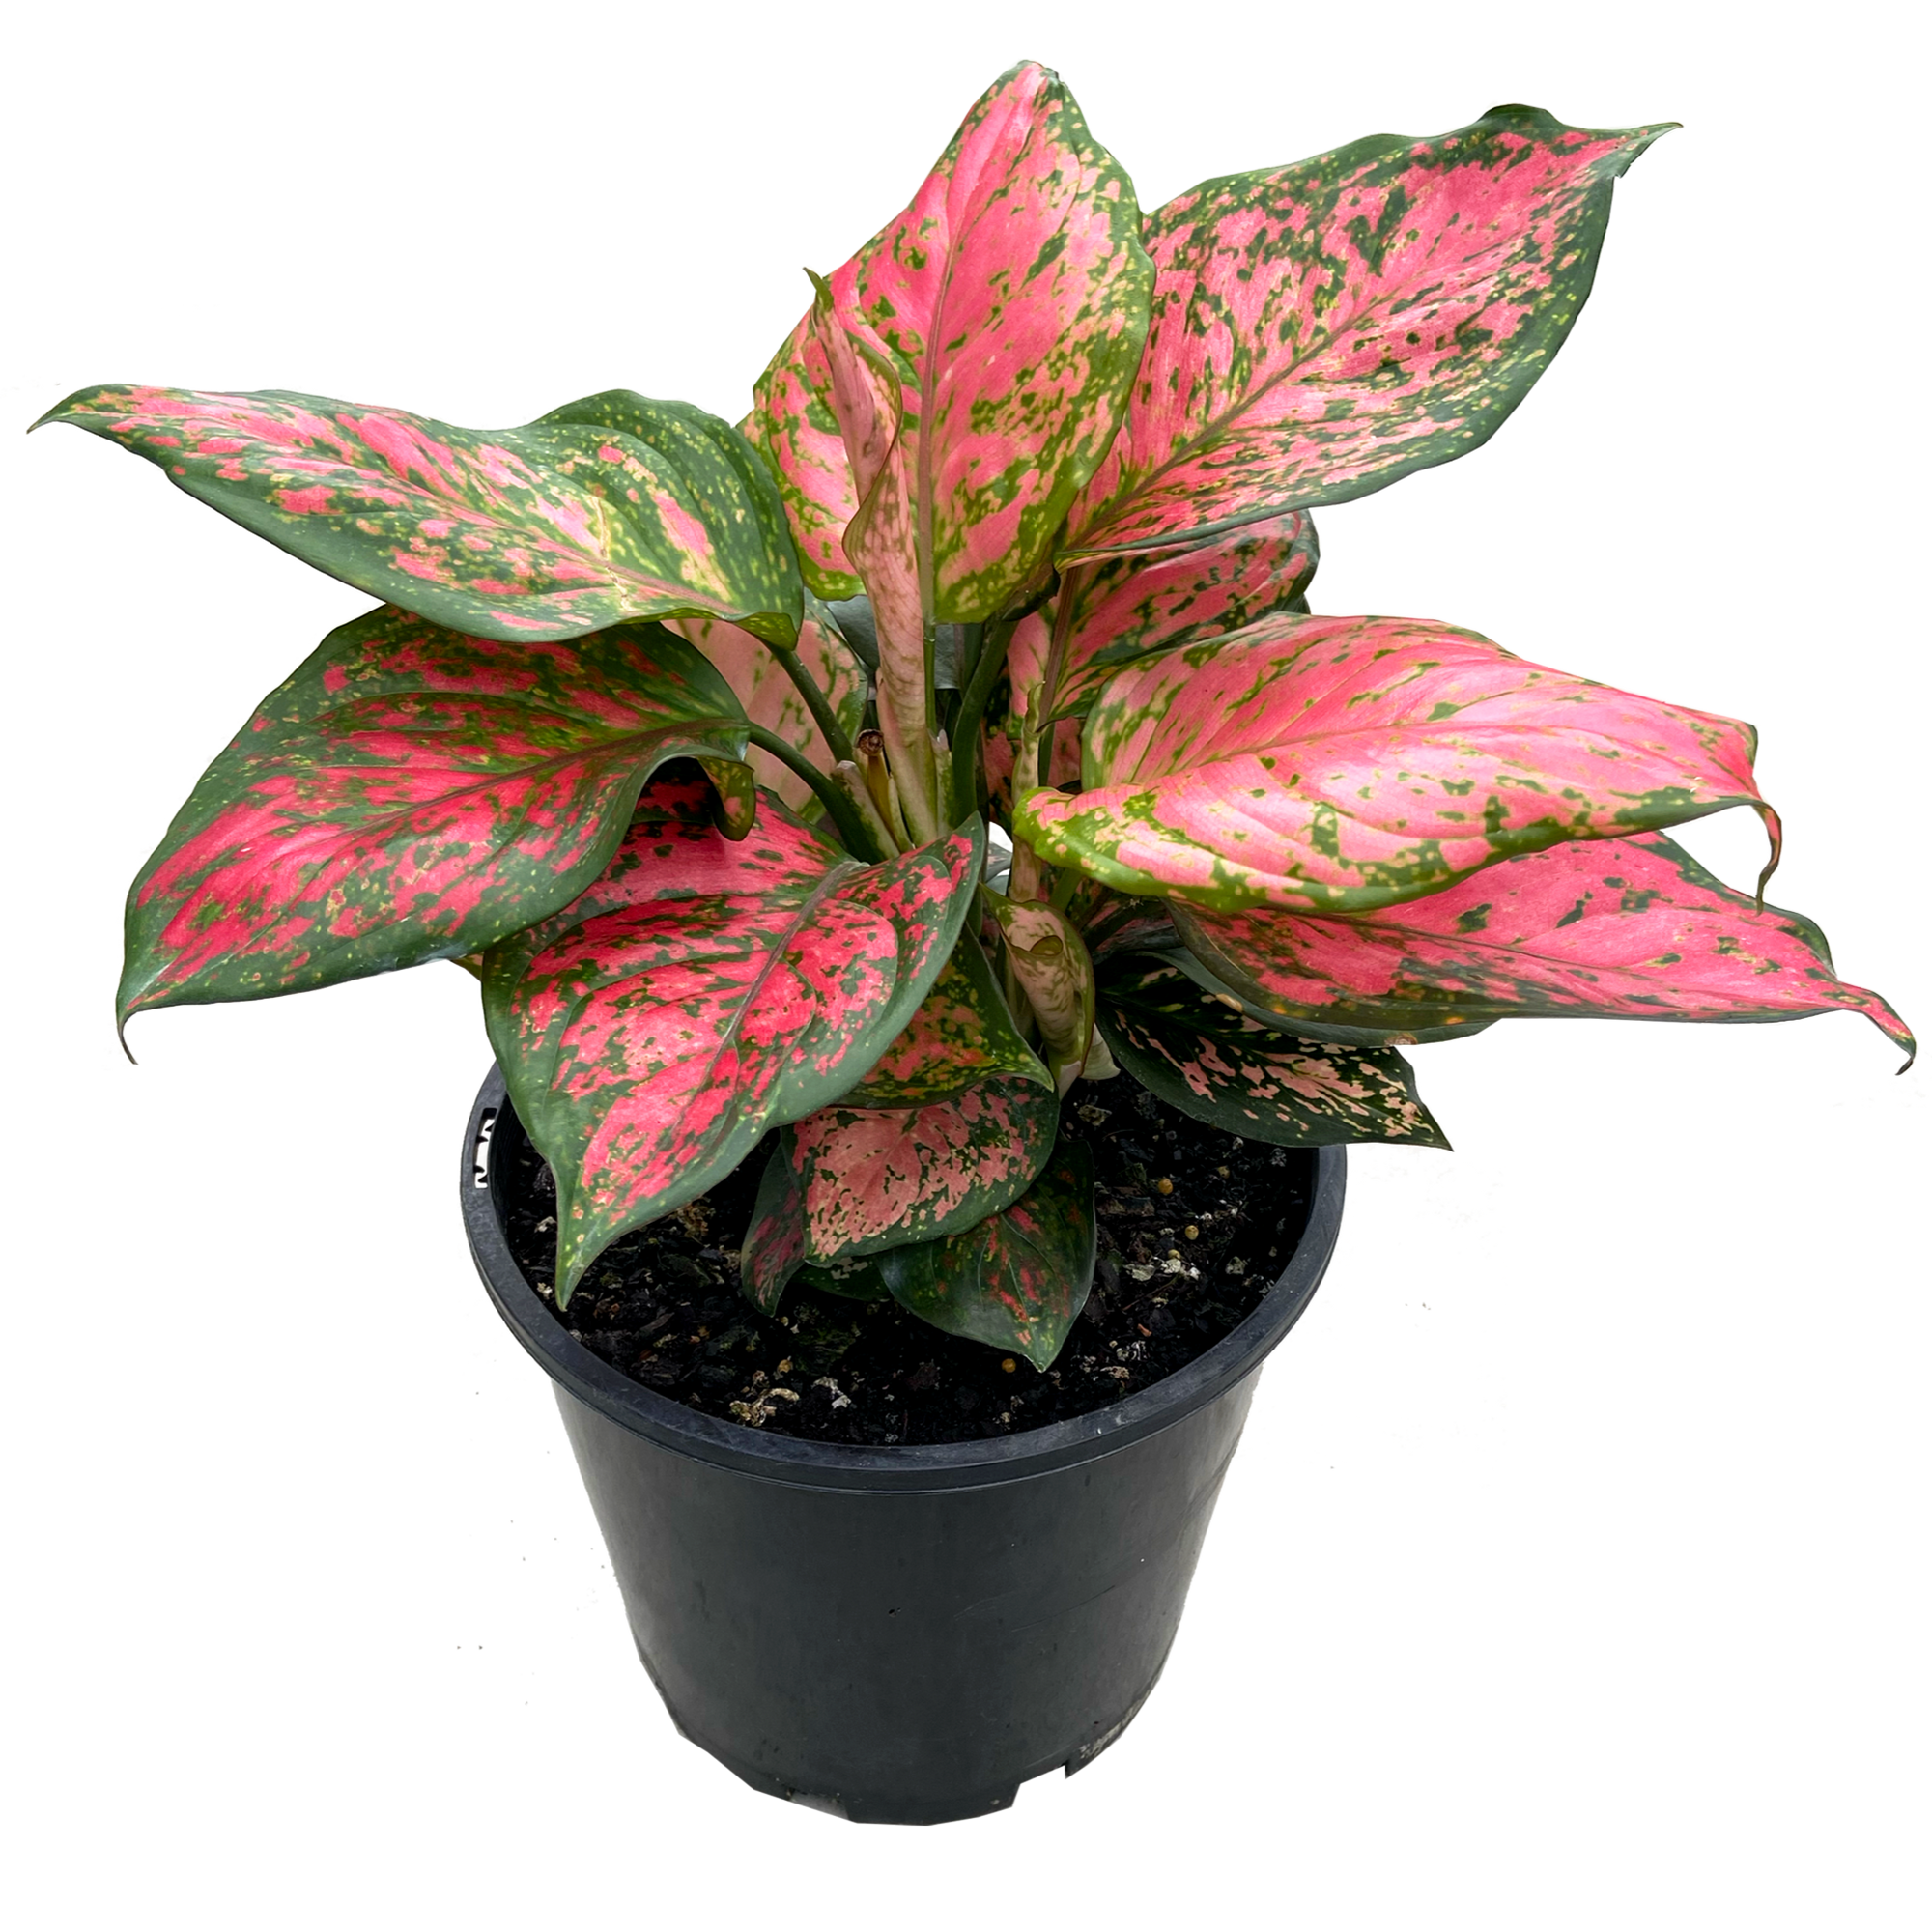 Aglaonema lady valentine pink and green leaves close up